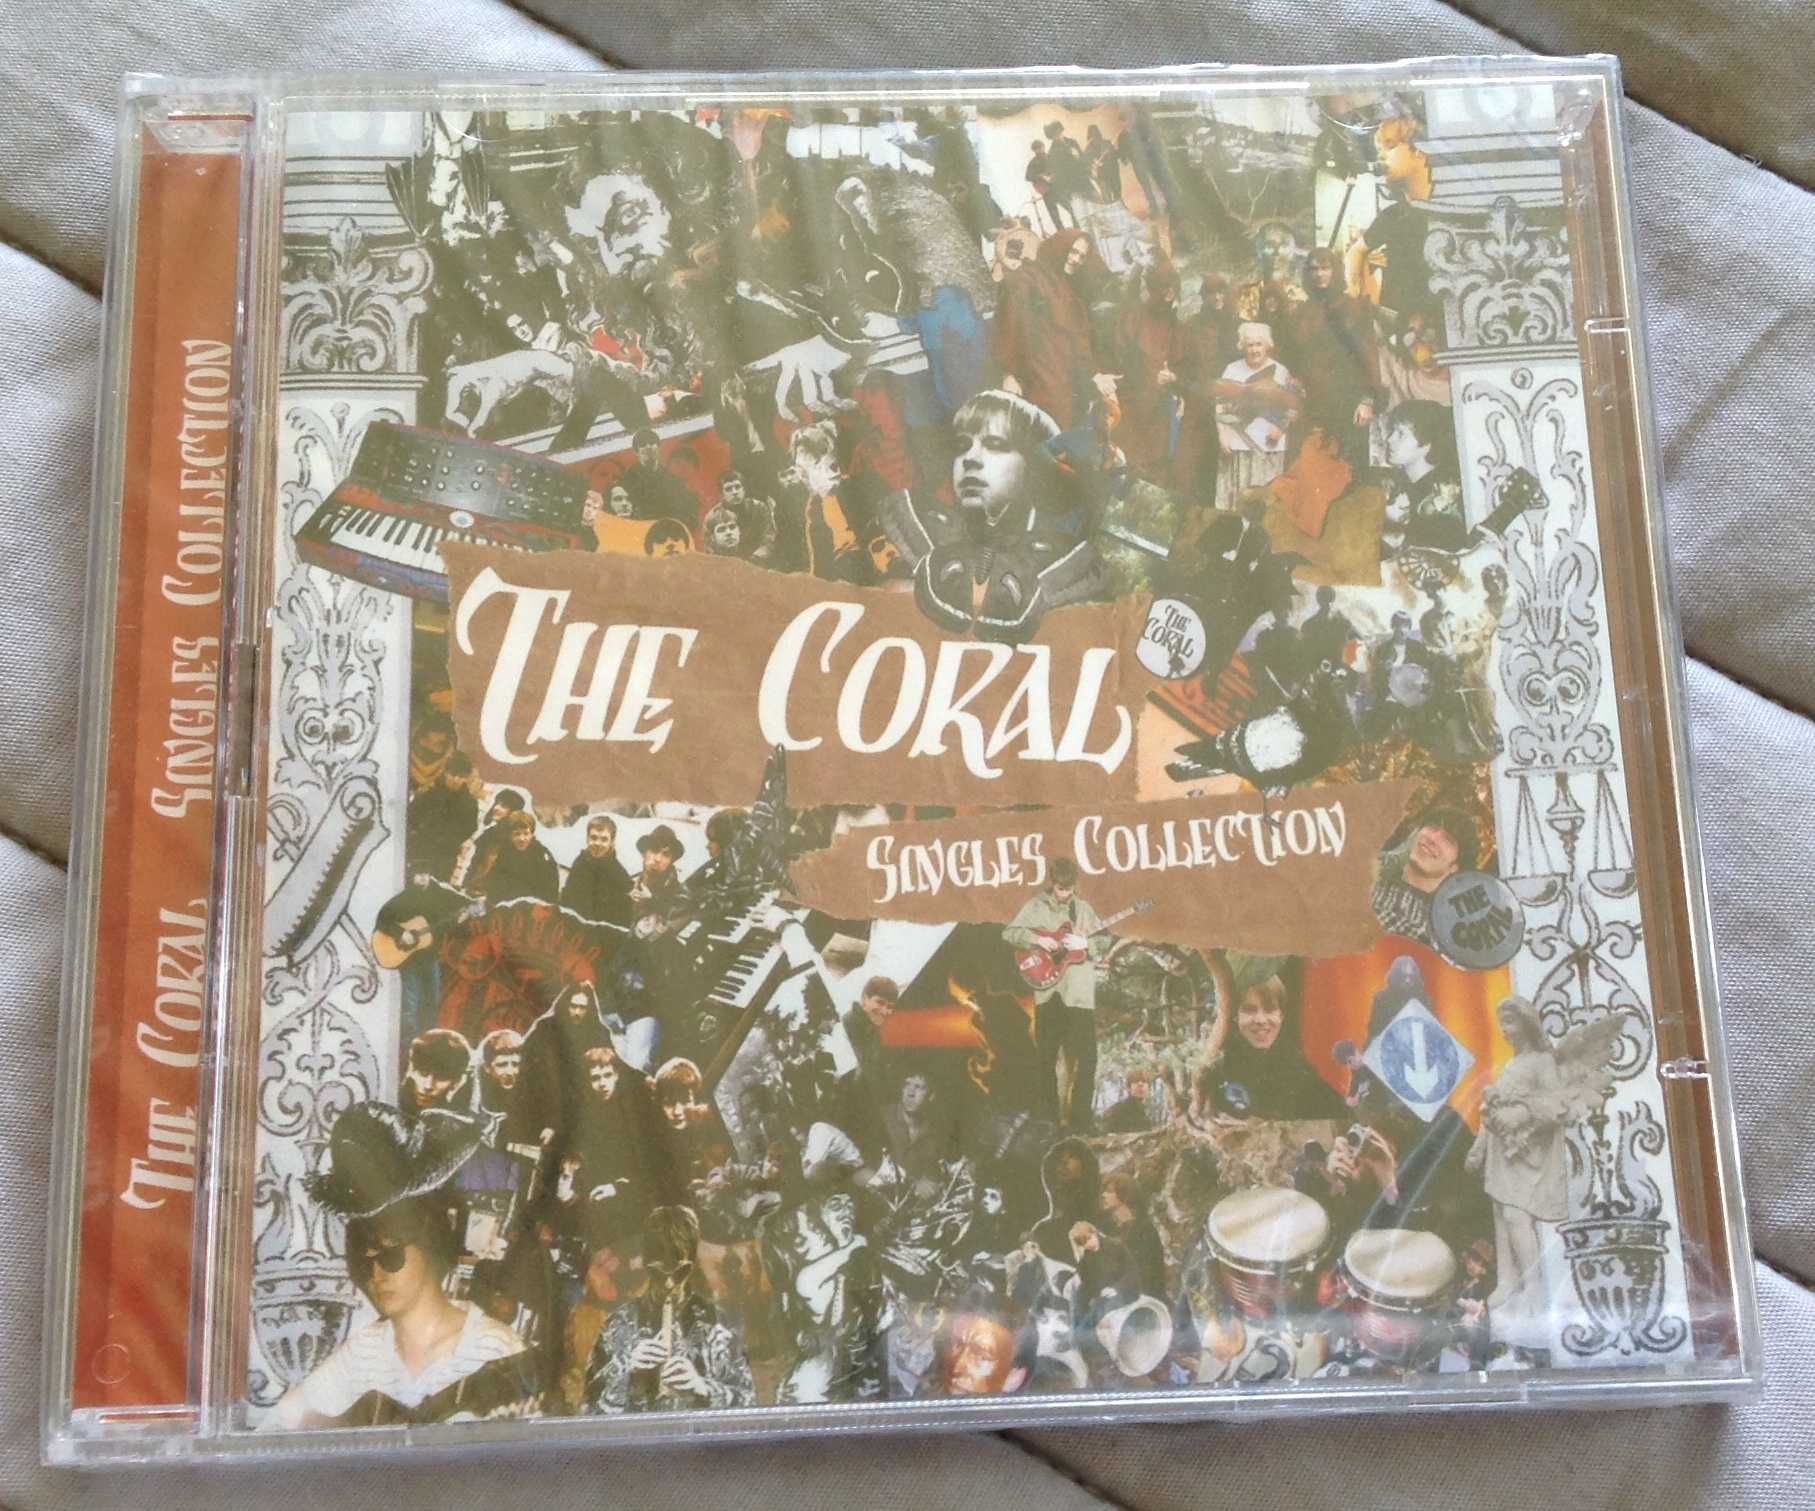 The Coral Singles Collection CD nowe w folii